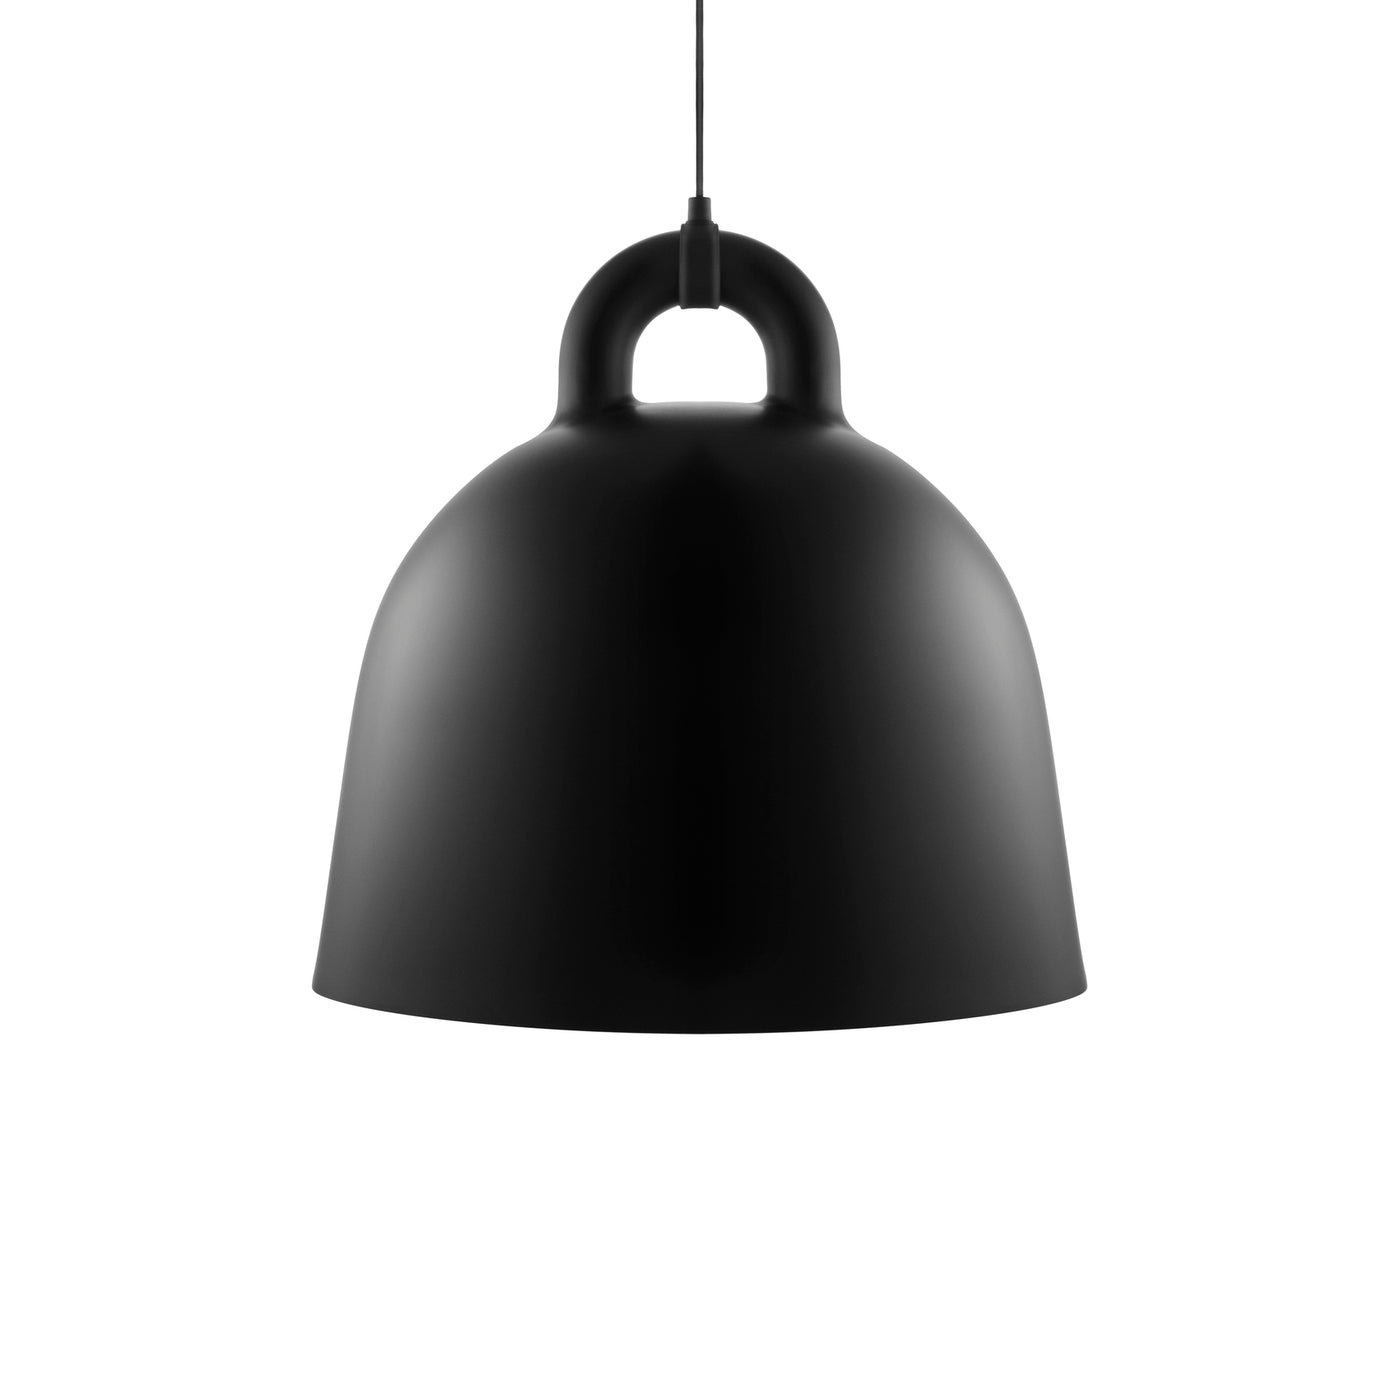 Norman Copenhagen Bell Pendant Lamp in black. Free UK delivery from someday designs #size_large